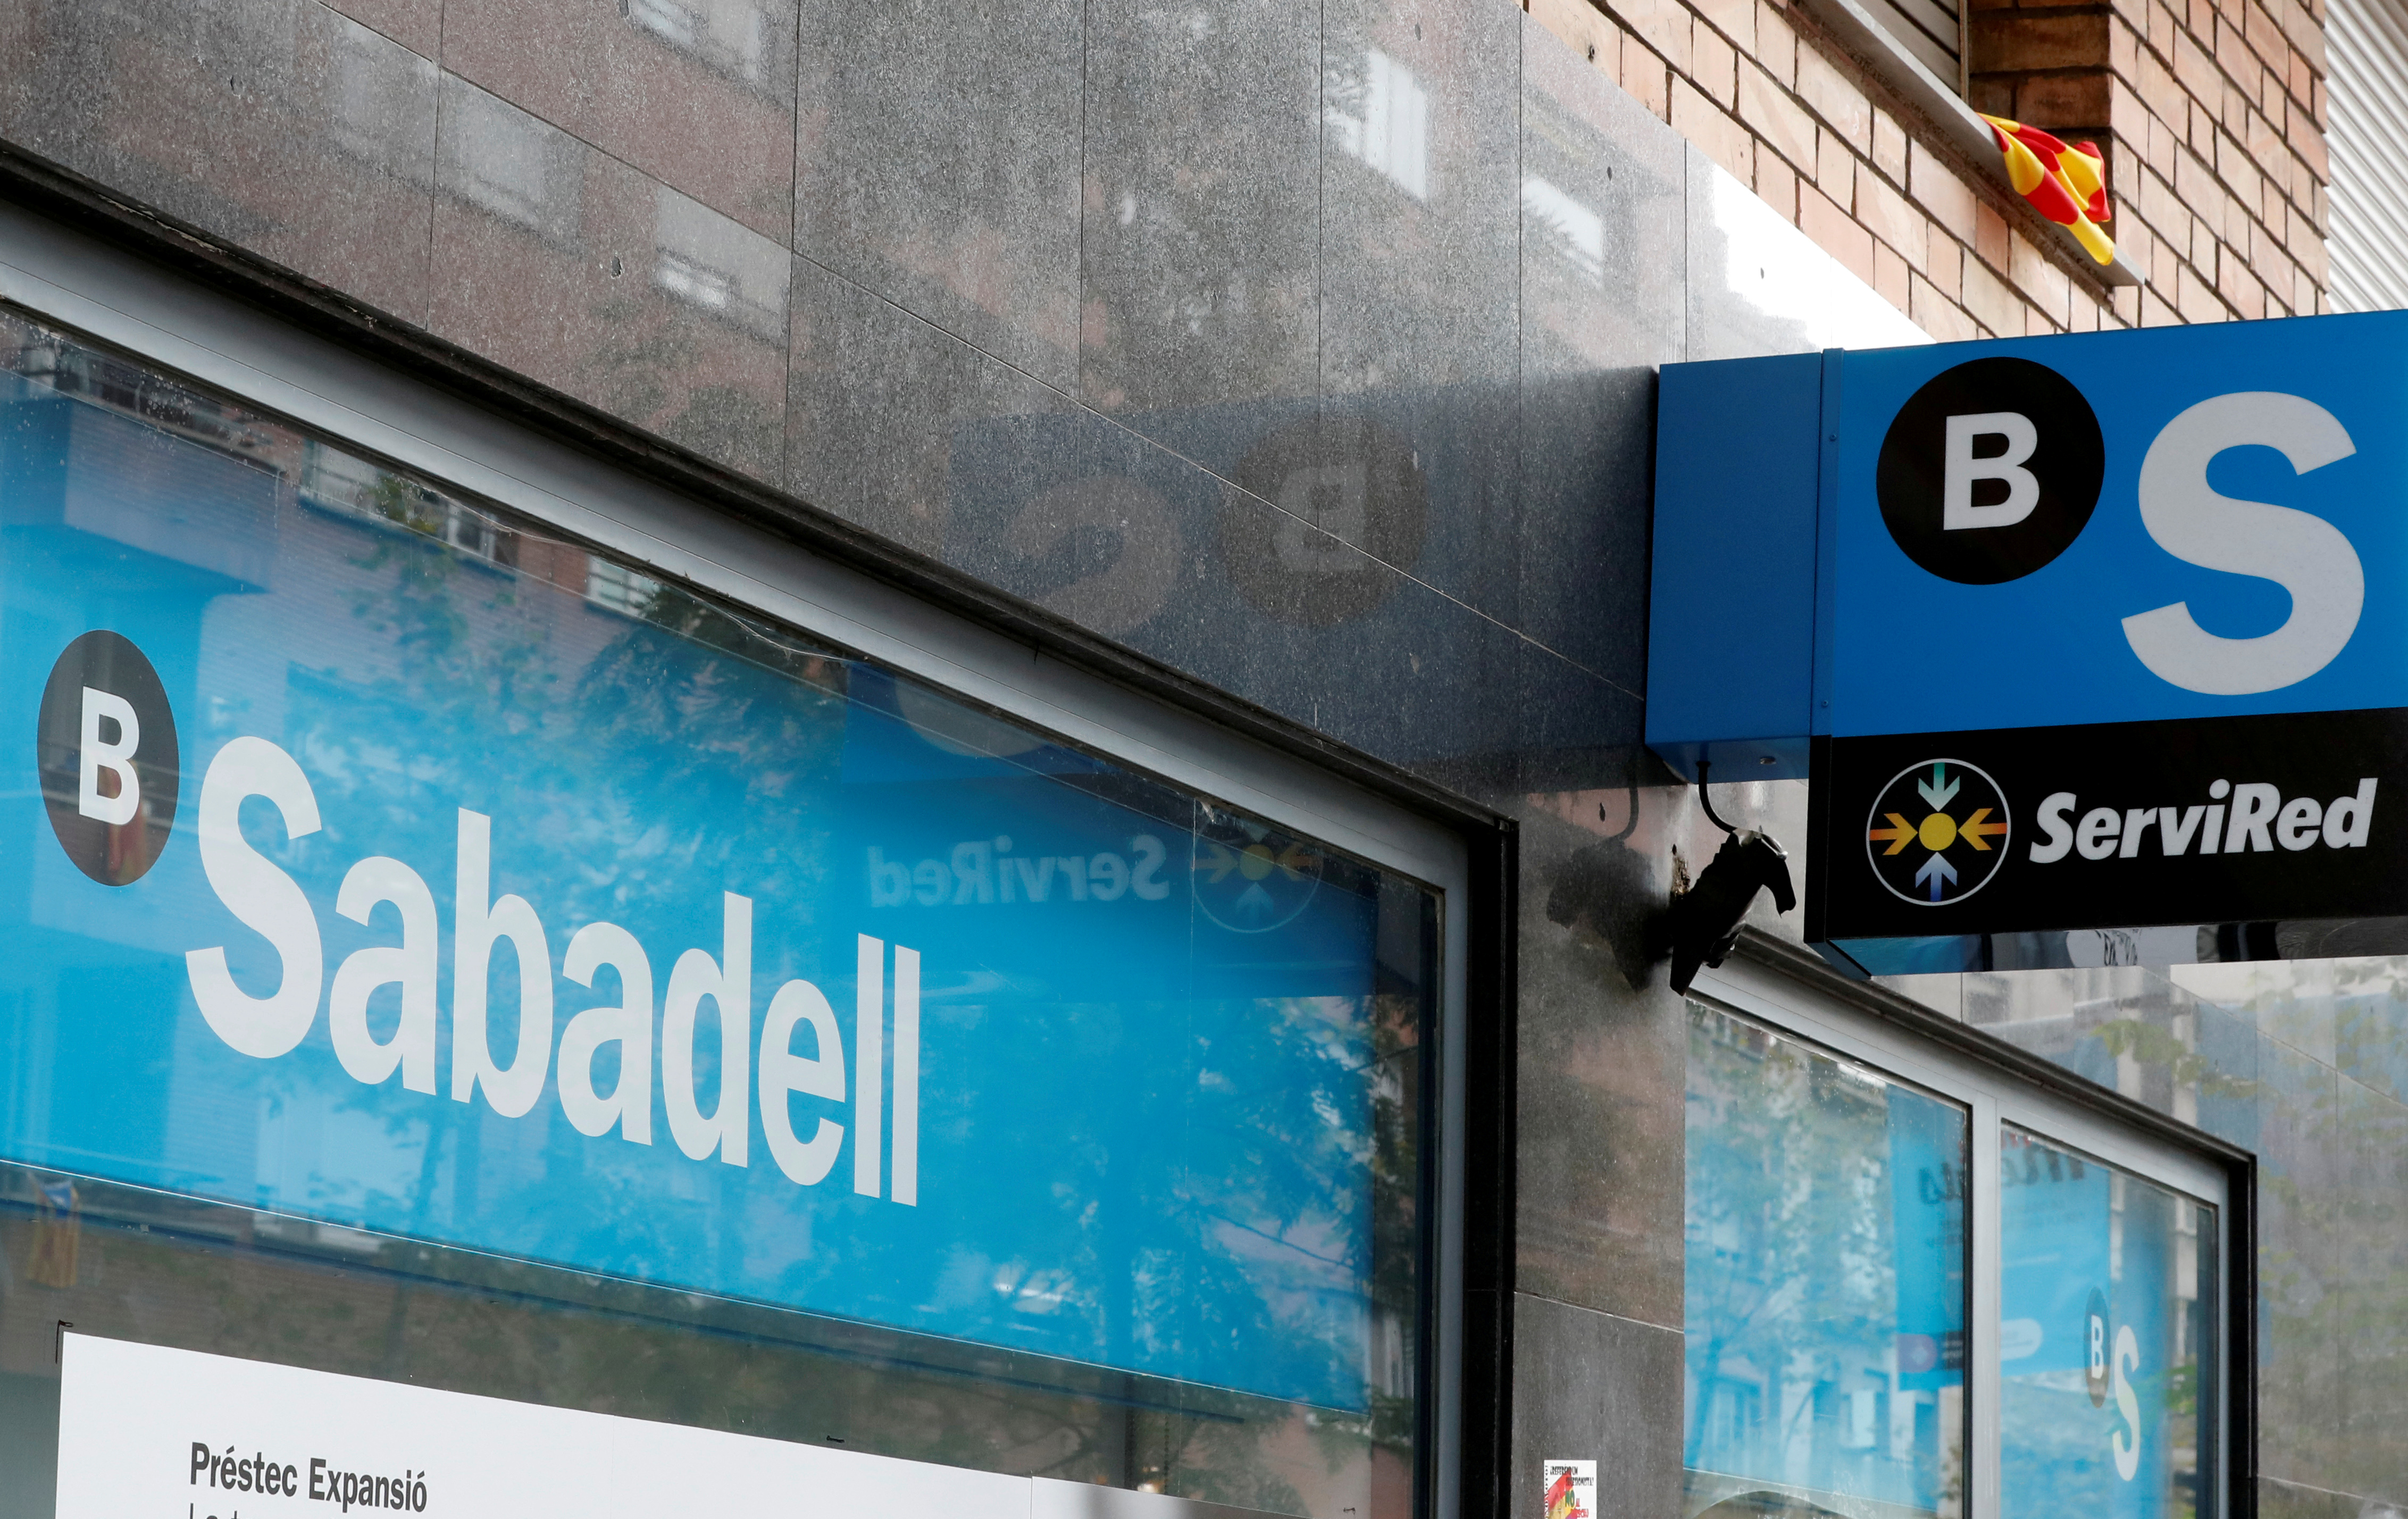 FILE PHOTO: A Catalan flag is seen above a logo at the Sabadell bank branch in Barcelona